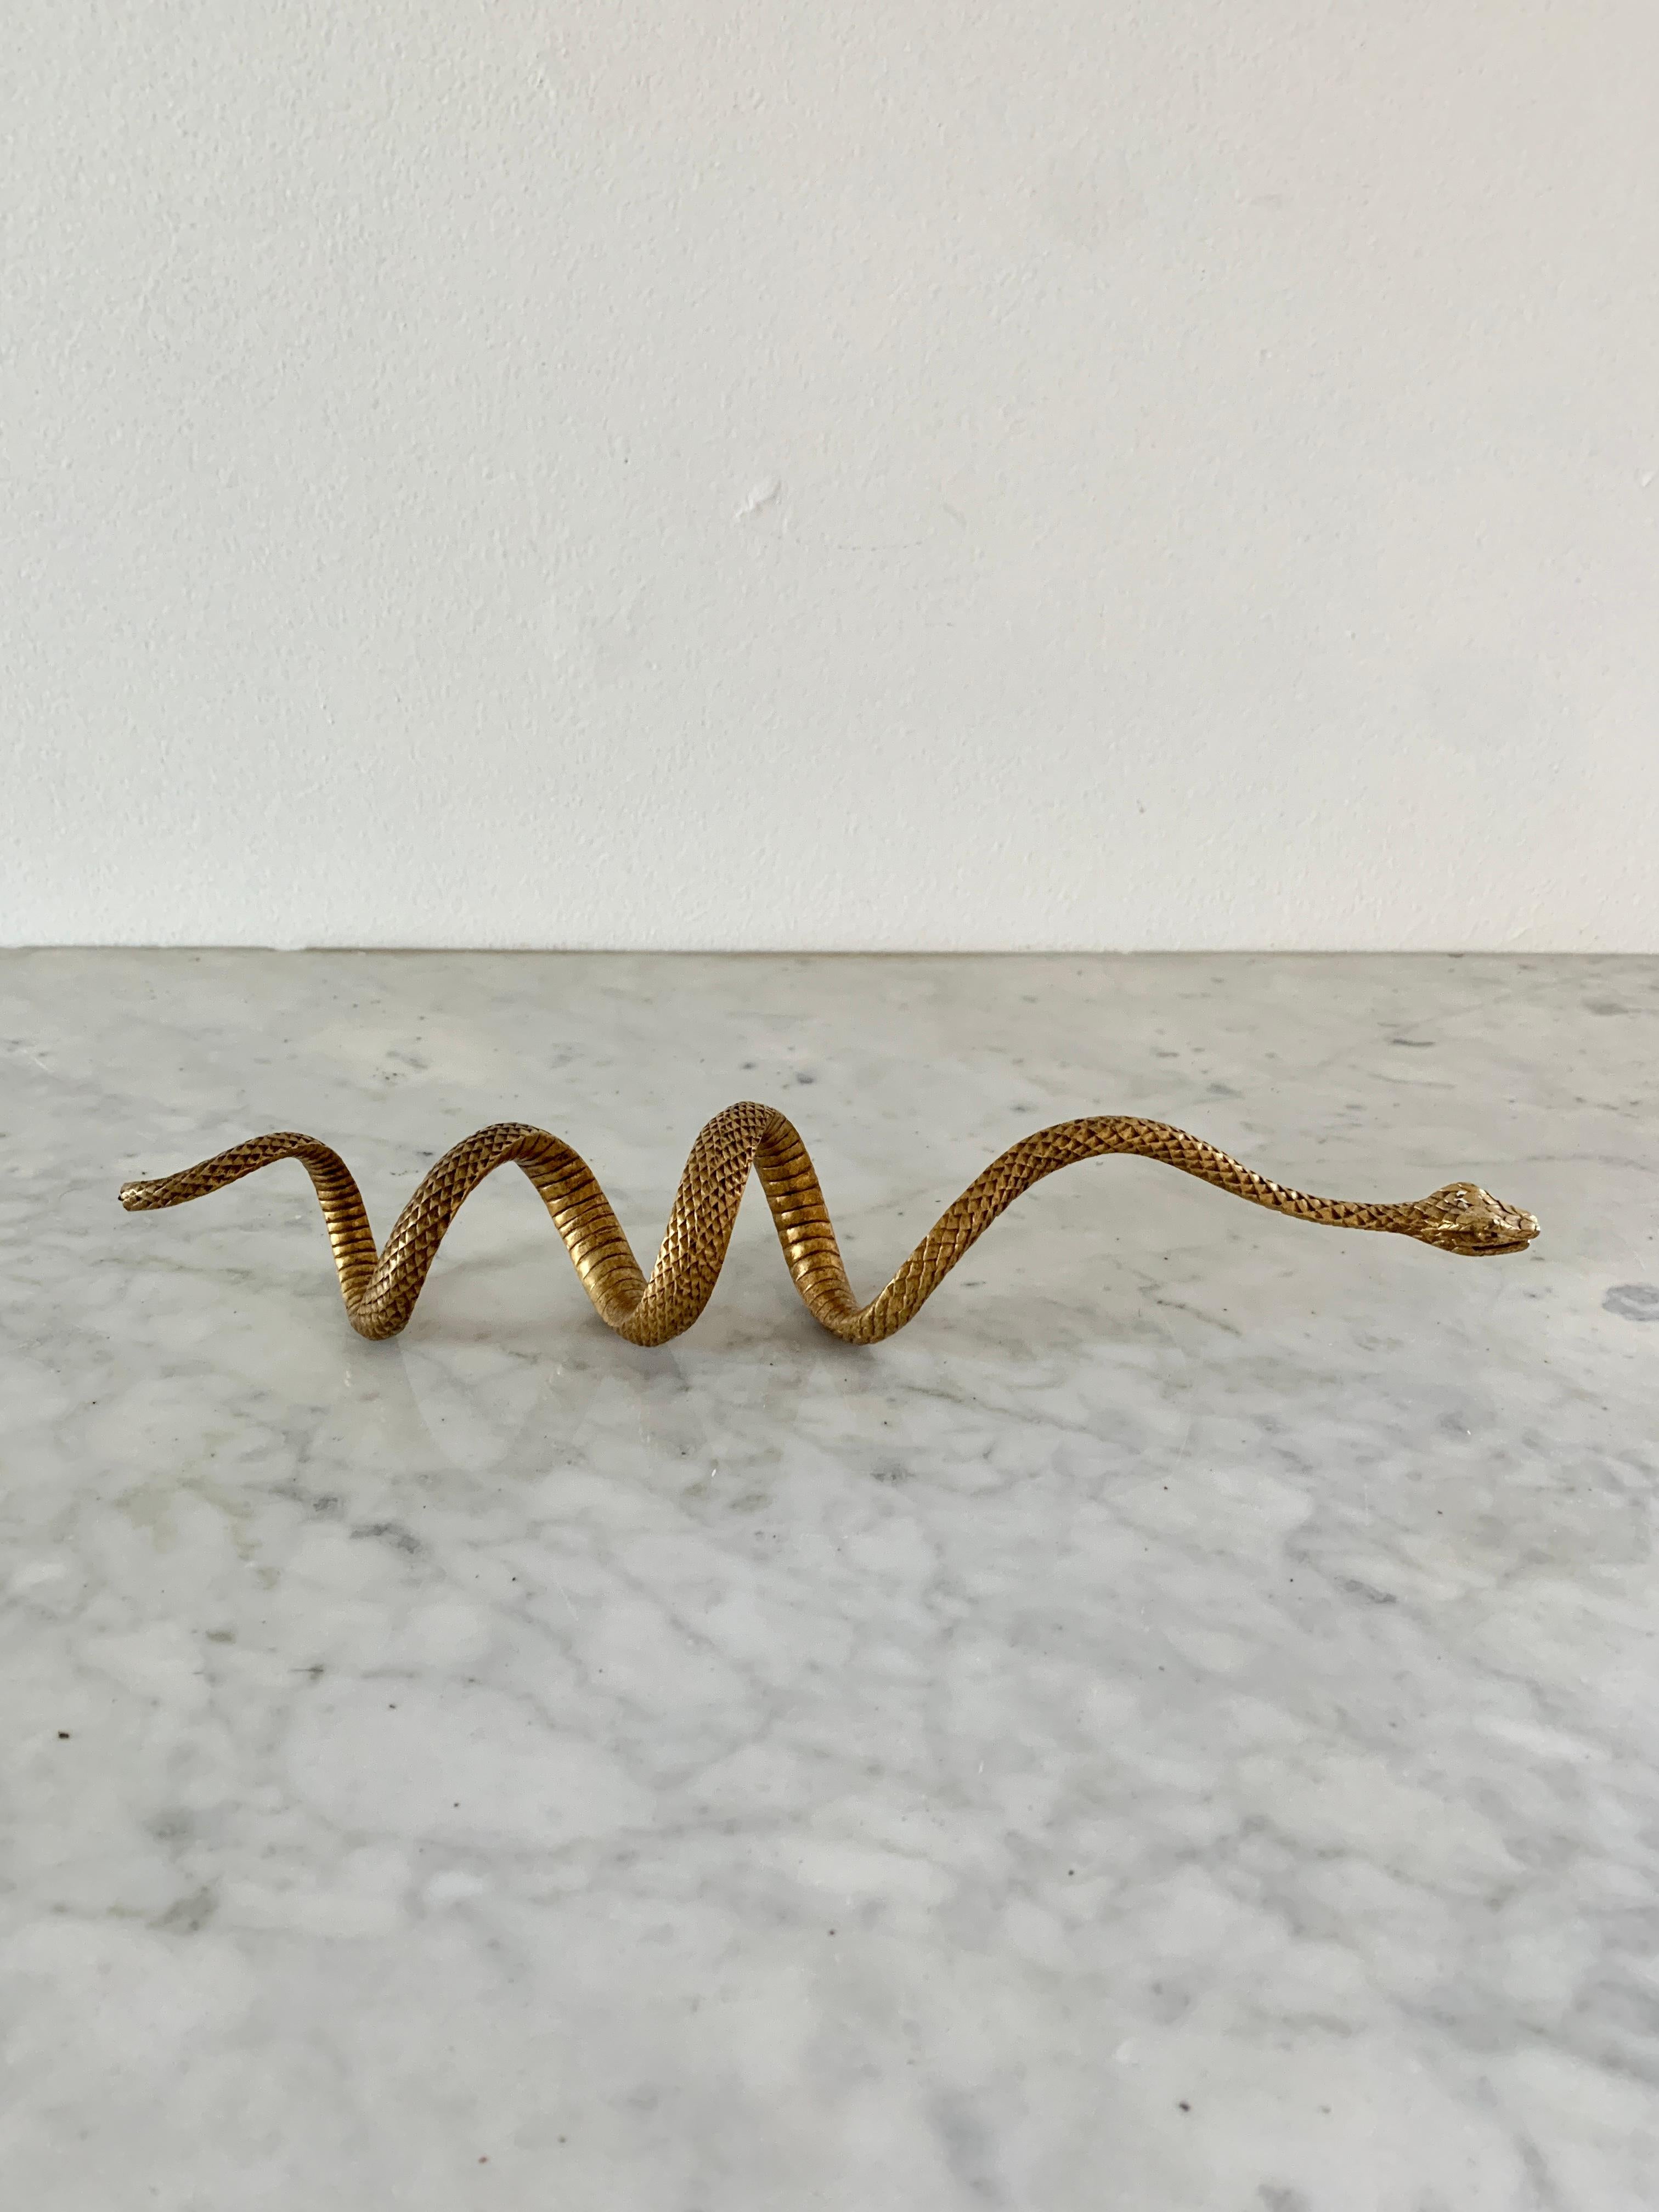 A wonderful Art Deco style cast brass coiled serpent snake 

circa Early 20th century

Measures: 12